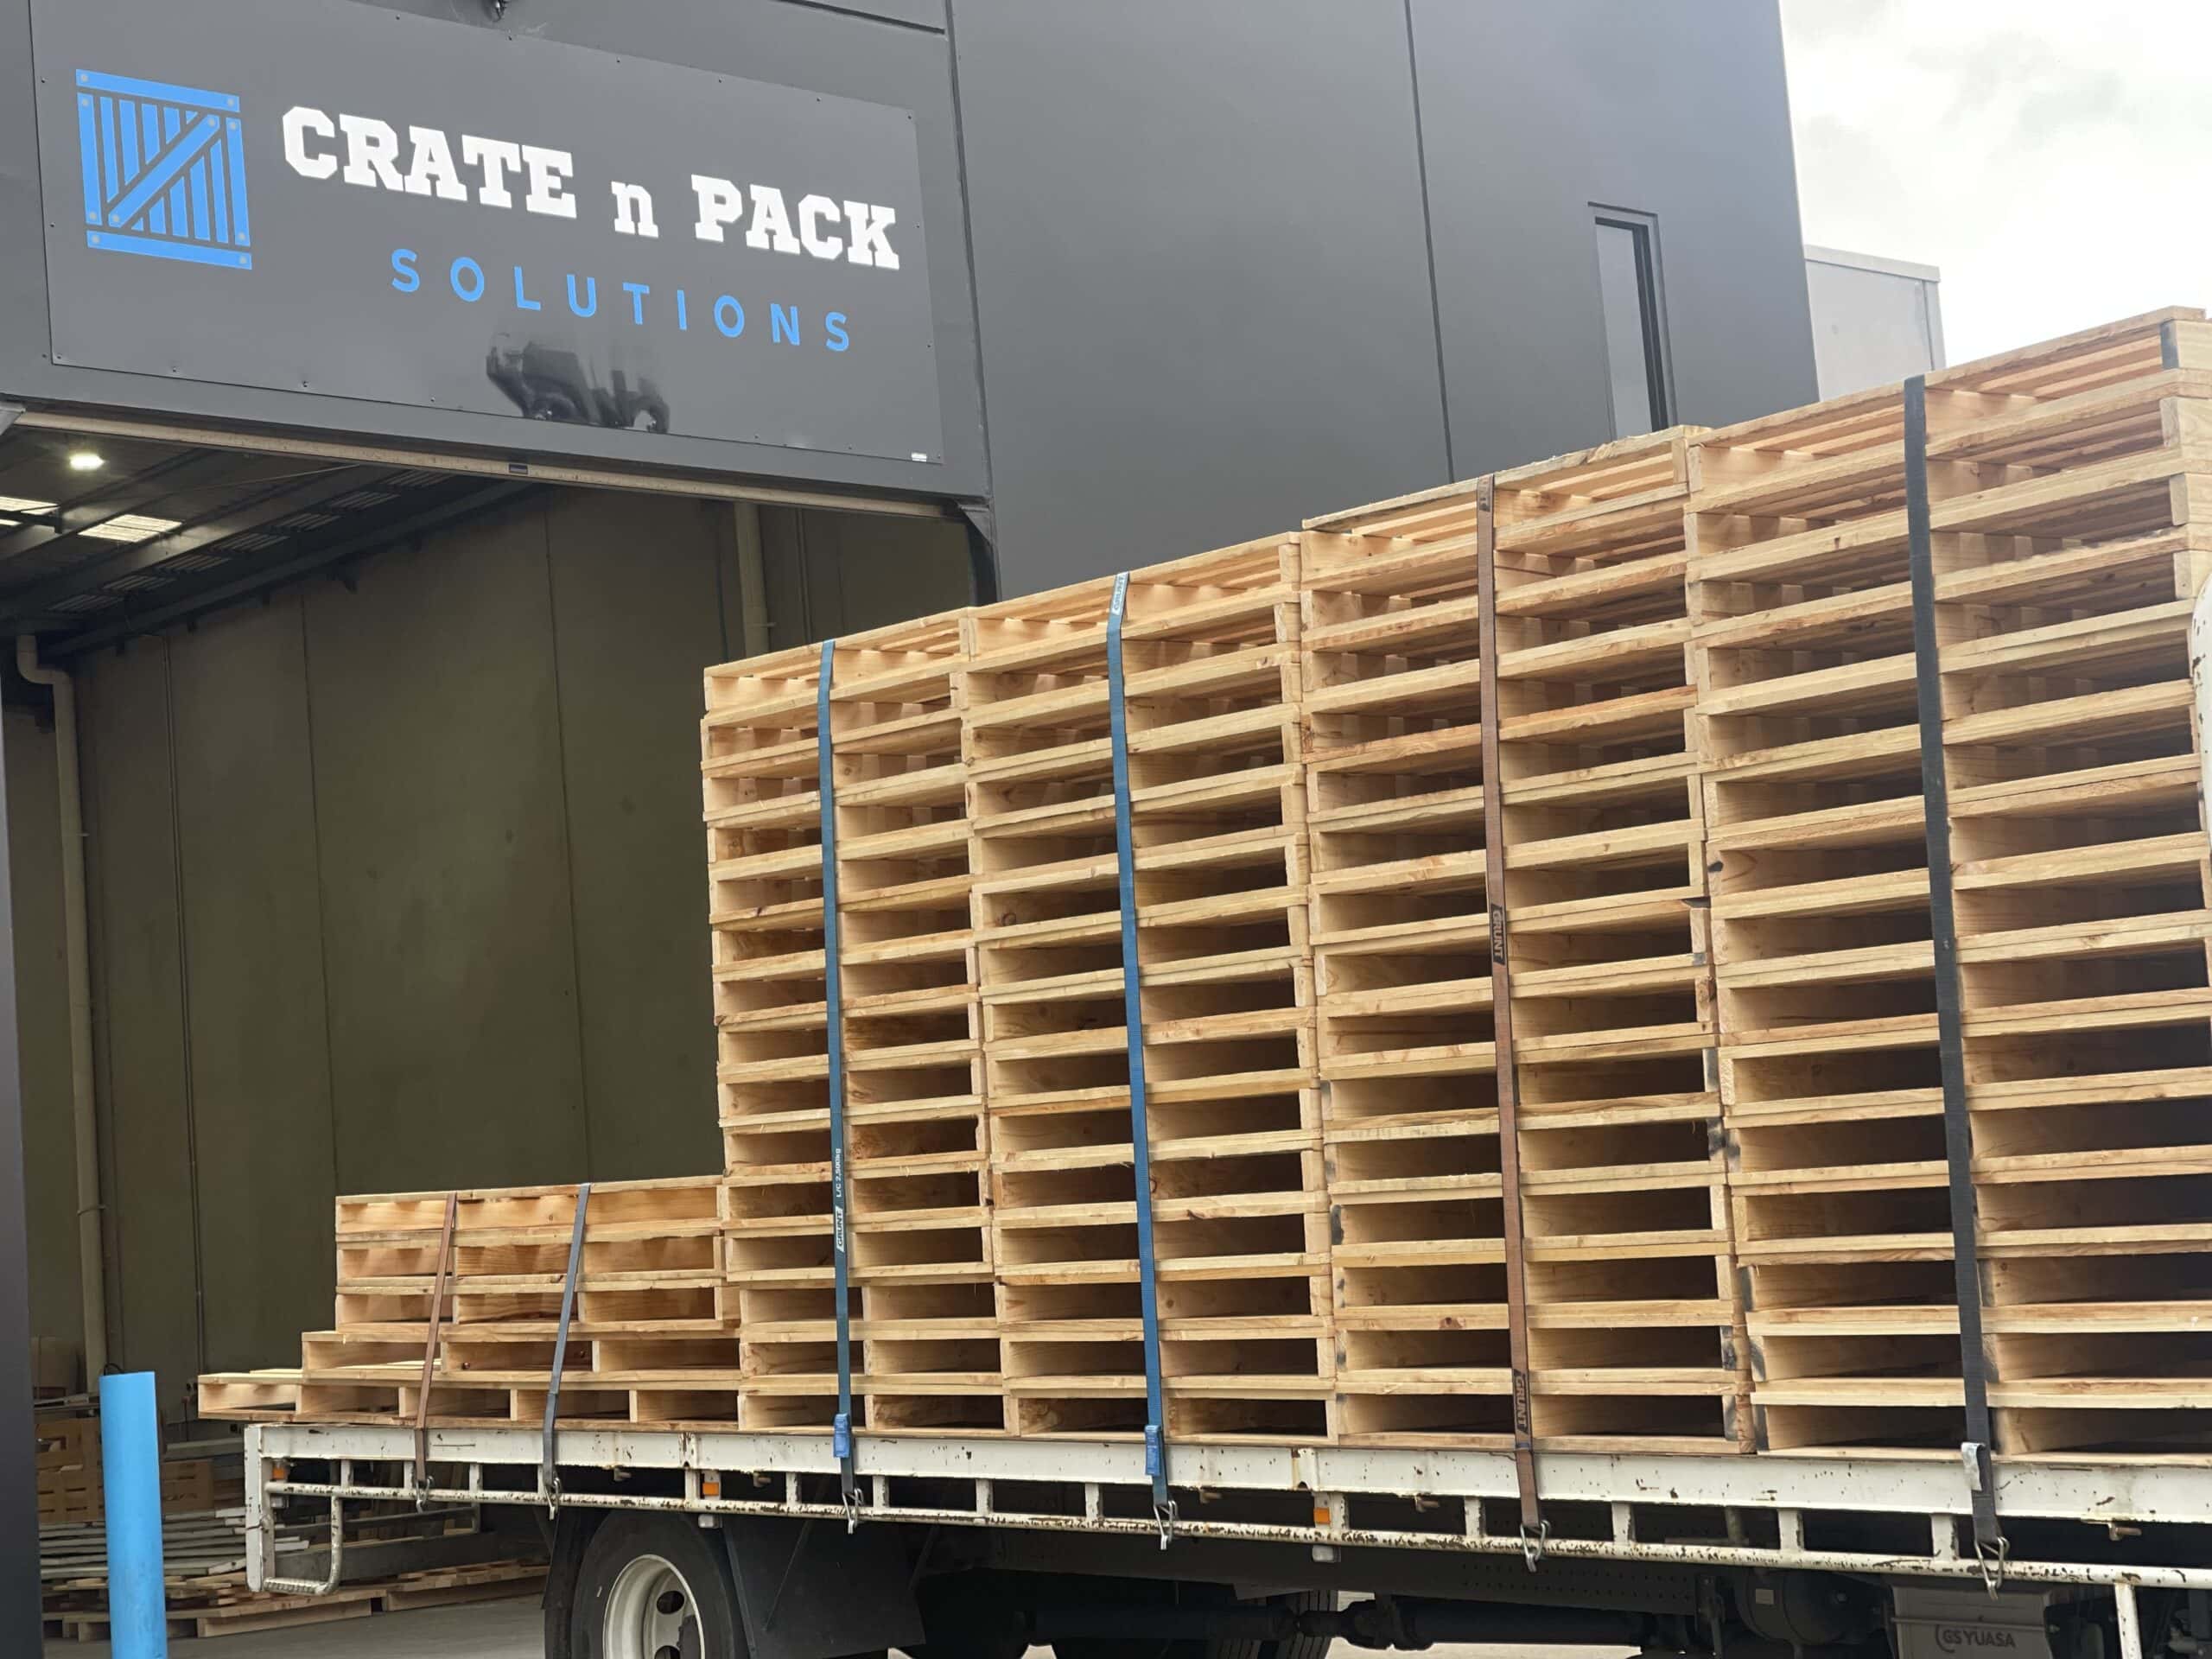 pallets with crate n pack log in background